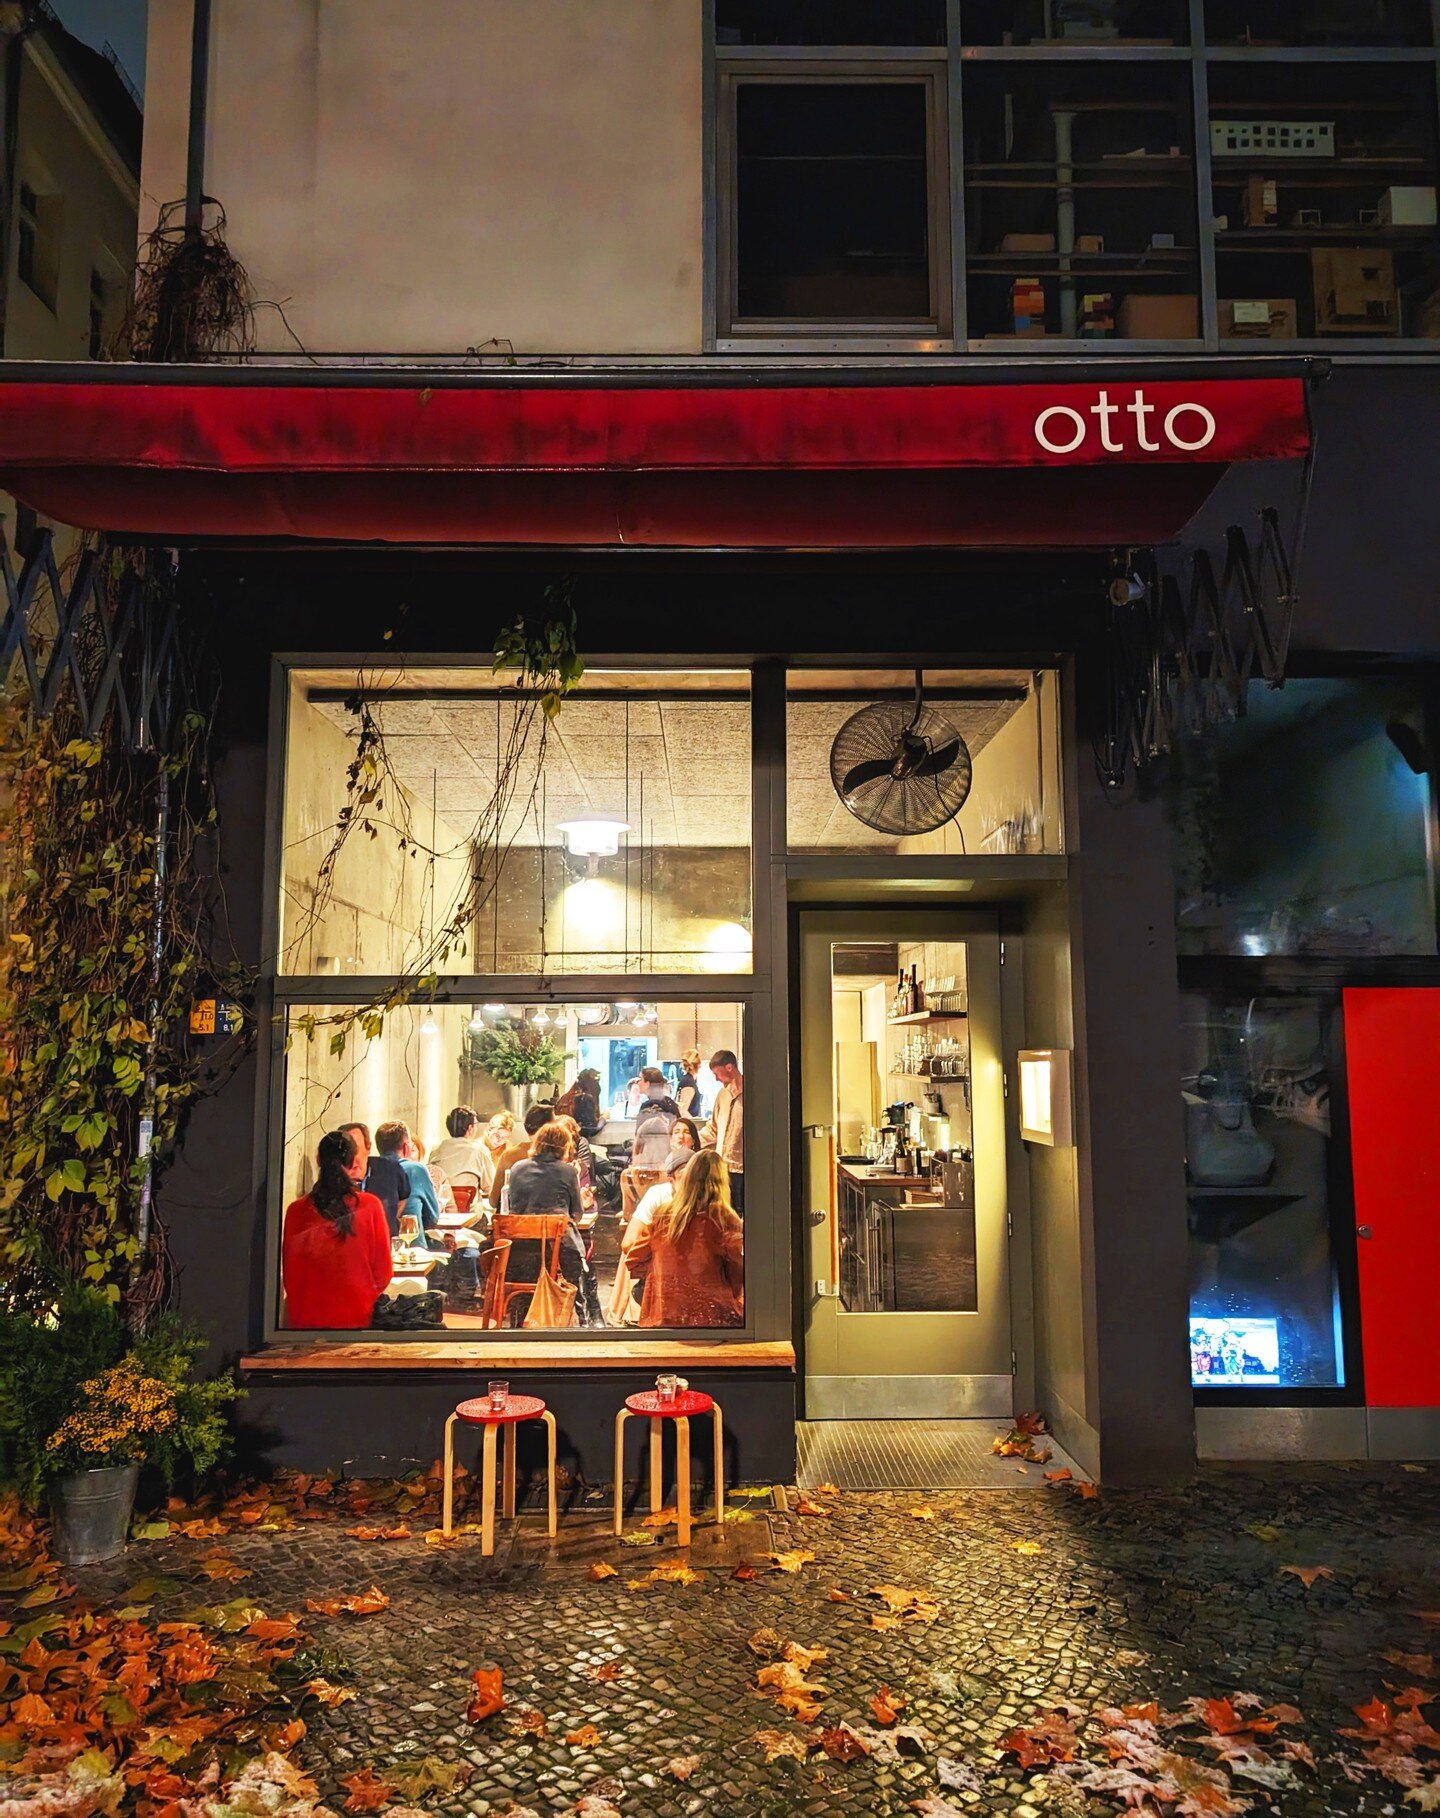 I had never been to Otto. And when I planned this trip to Berlin, I thought it was finally time to visit it.

Also, and now please pay close attention, Gastro Germany, this city always has counters in many restaurants that you can book online as a de